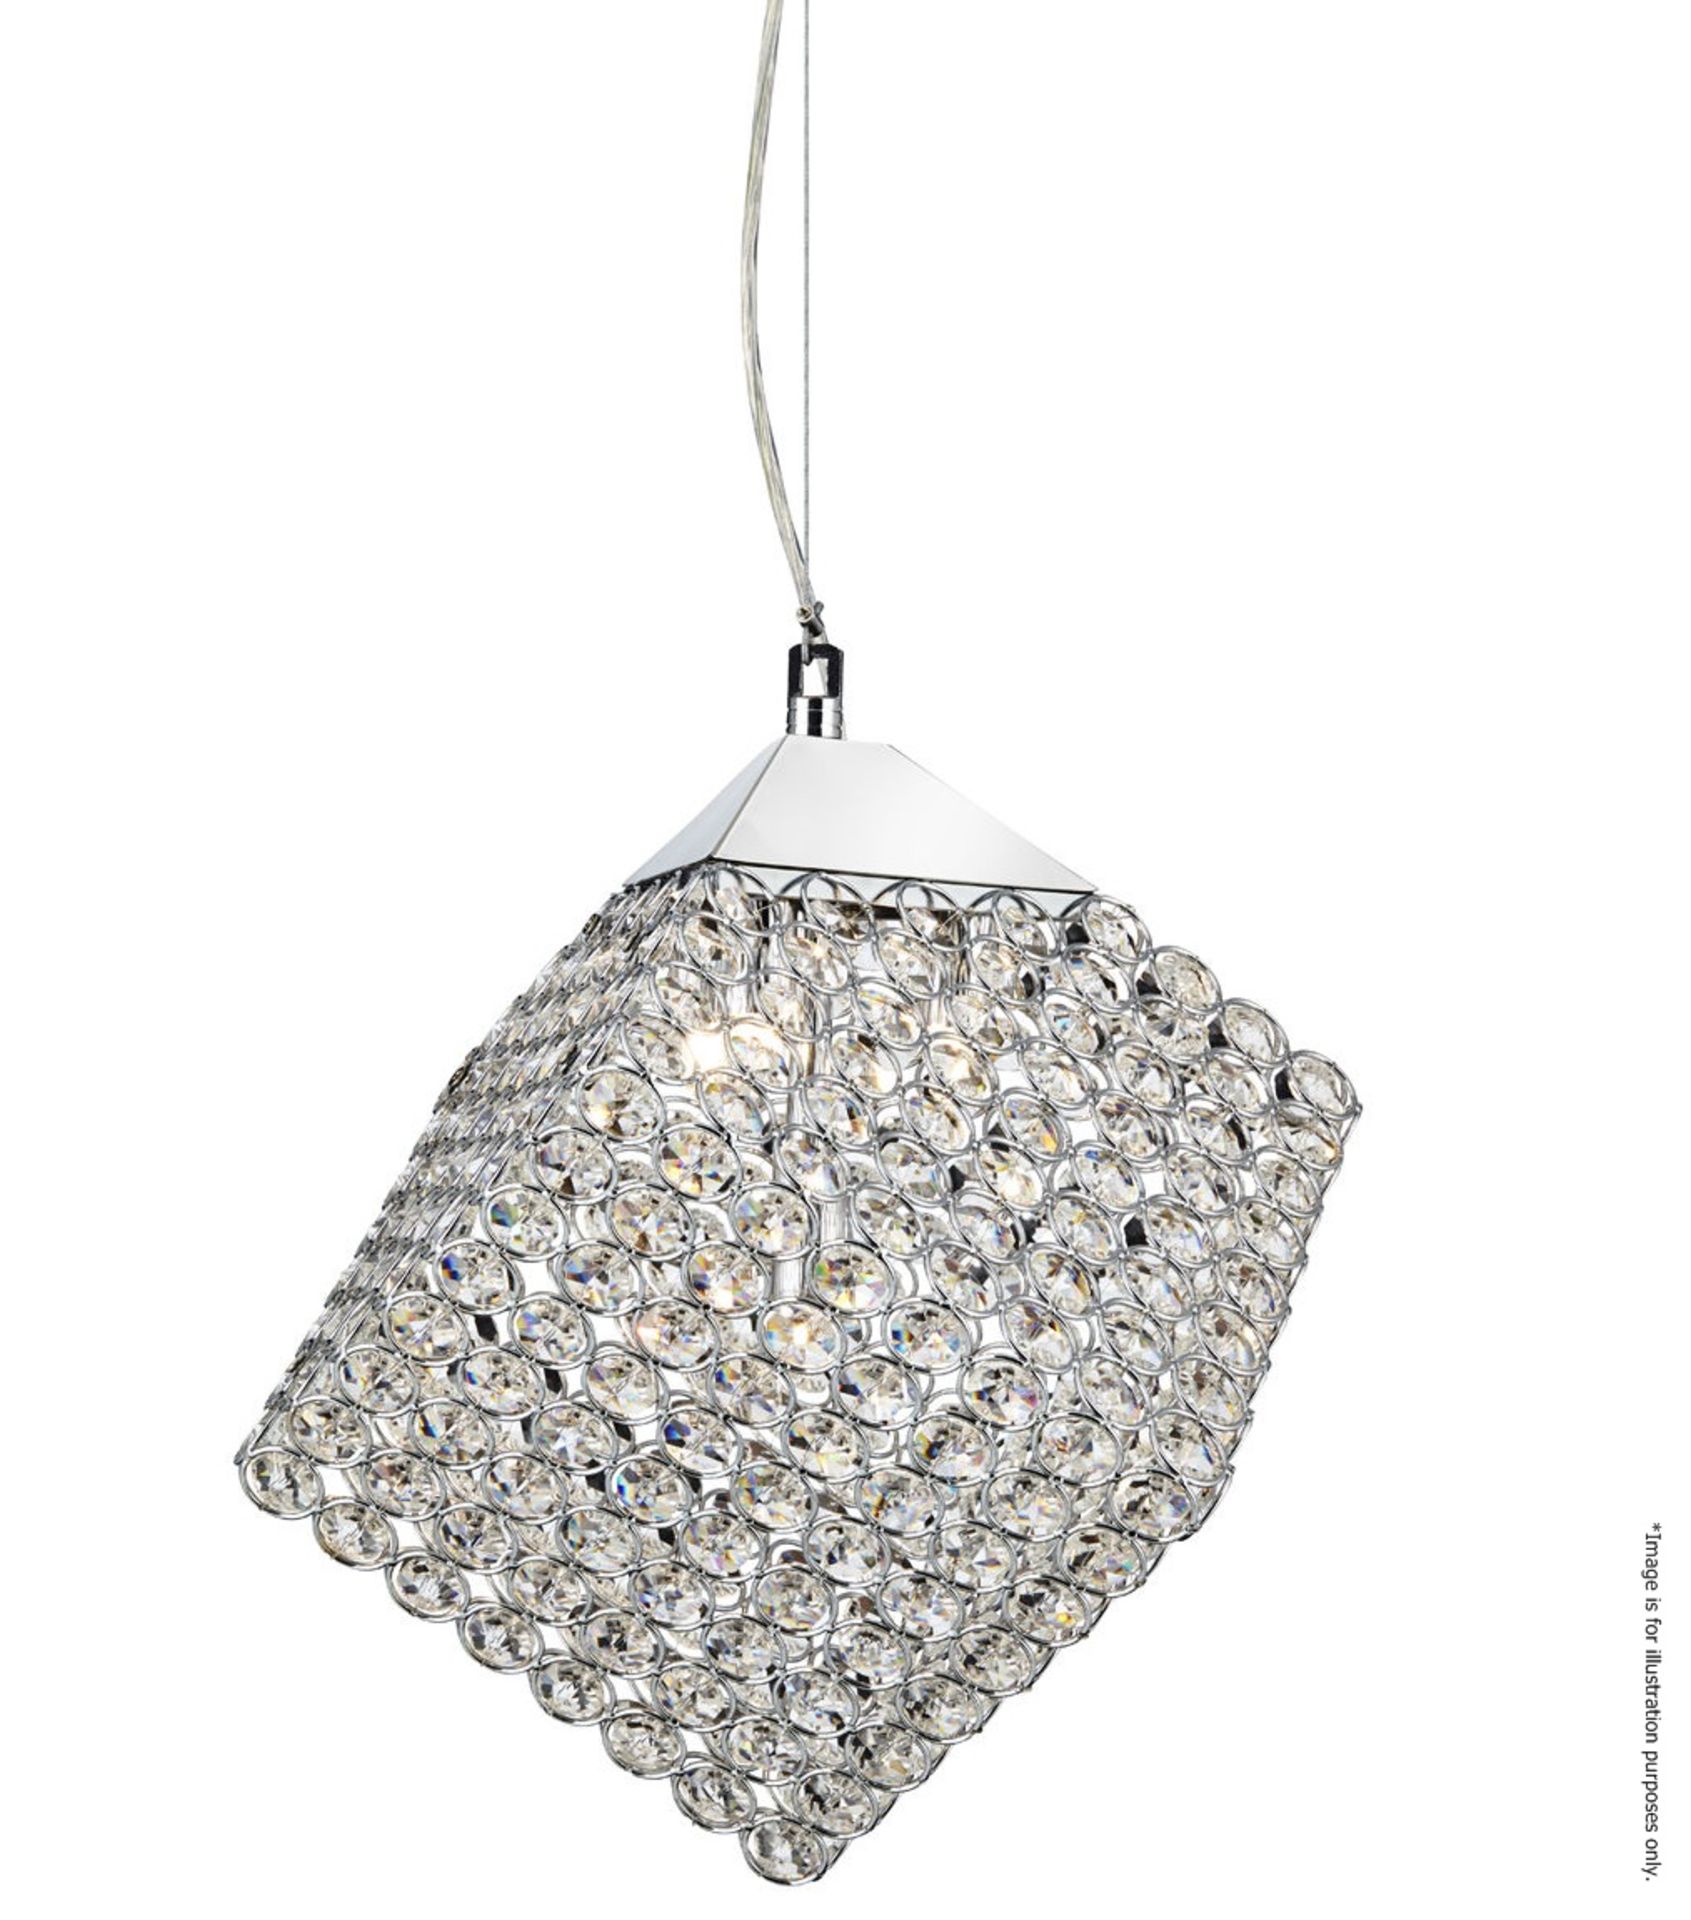 1 x Pendant 4-Light Ceiling Light With Clear Crystal Button Inserts - Chrome Finish - RRP £237.60